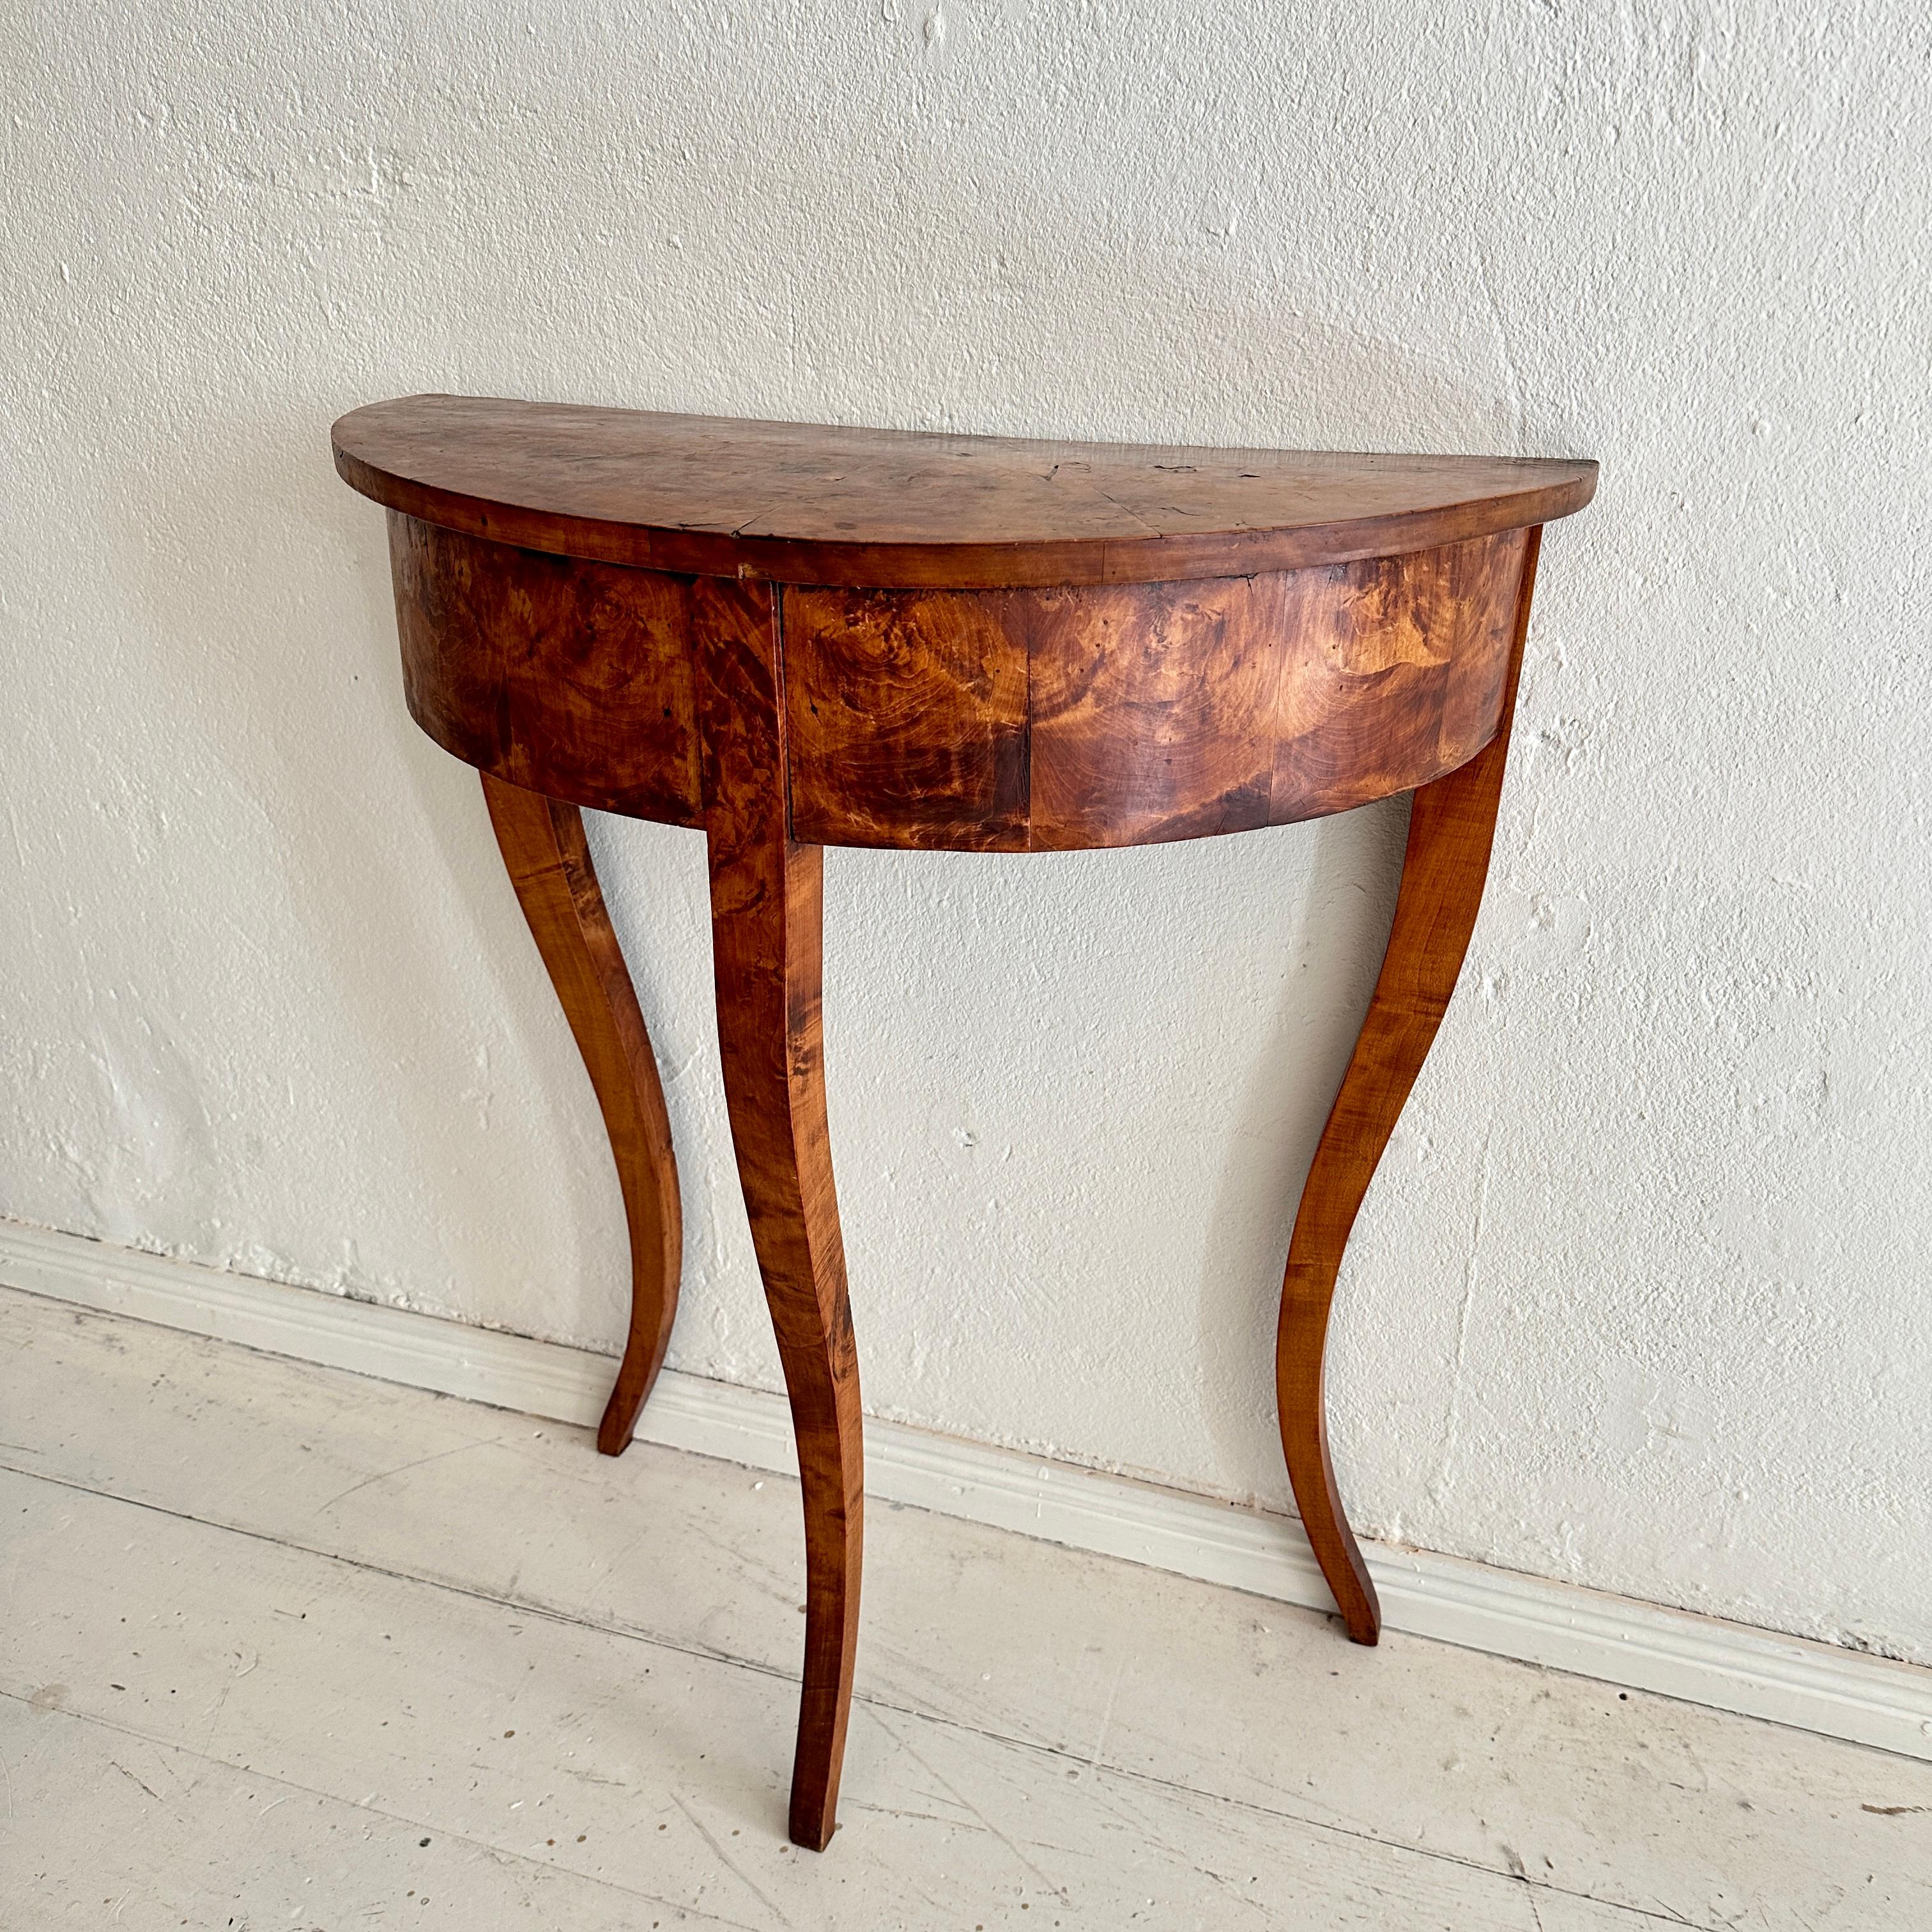 This beautiful small Biedermeier console table was made in Sweden in the 1820s. It has elegantly curved legs and is made of birch and spruce. The console is in a beautiful original condition.
A unique piece which is a great eye-catcher for your